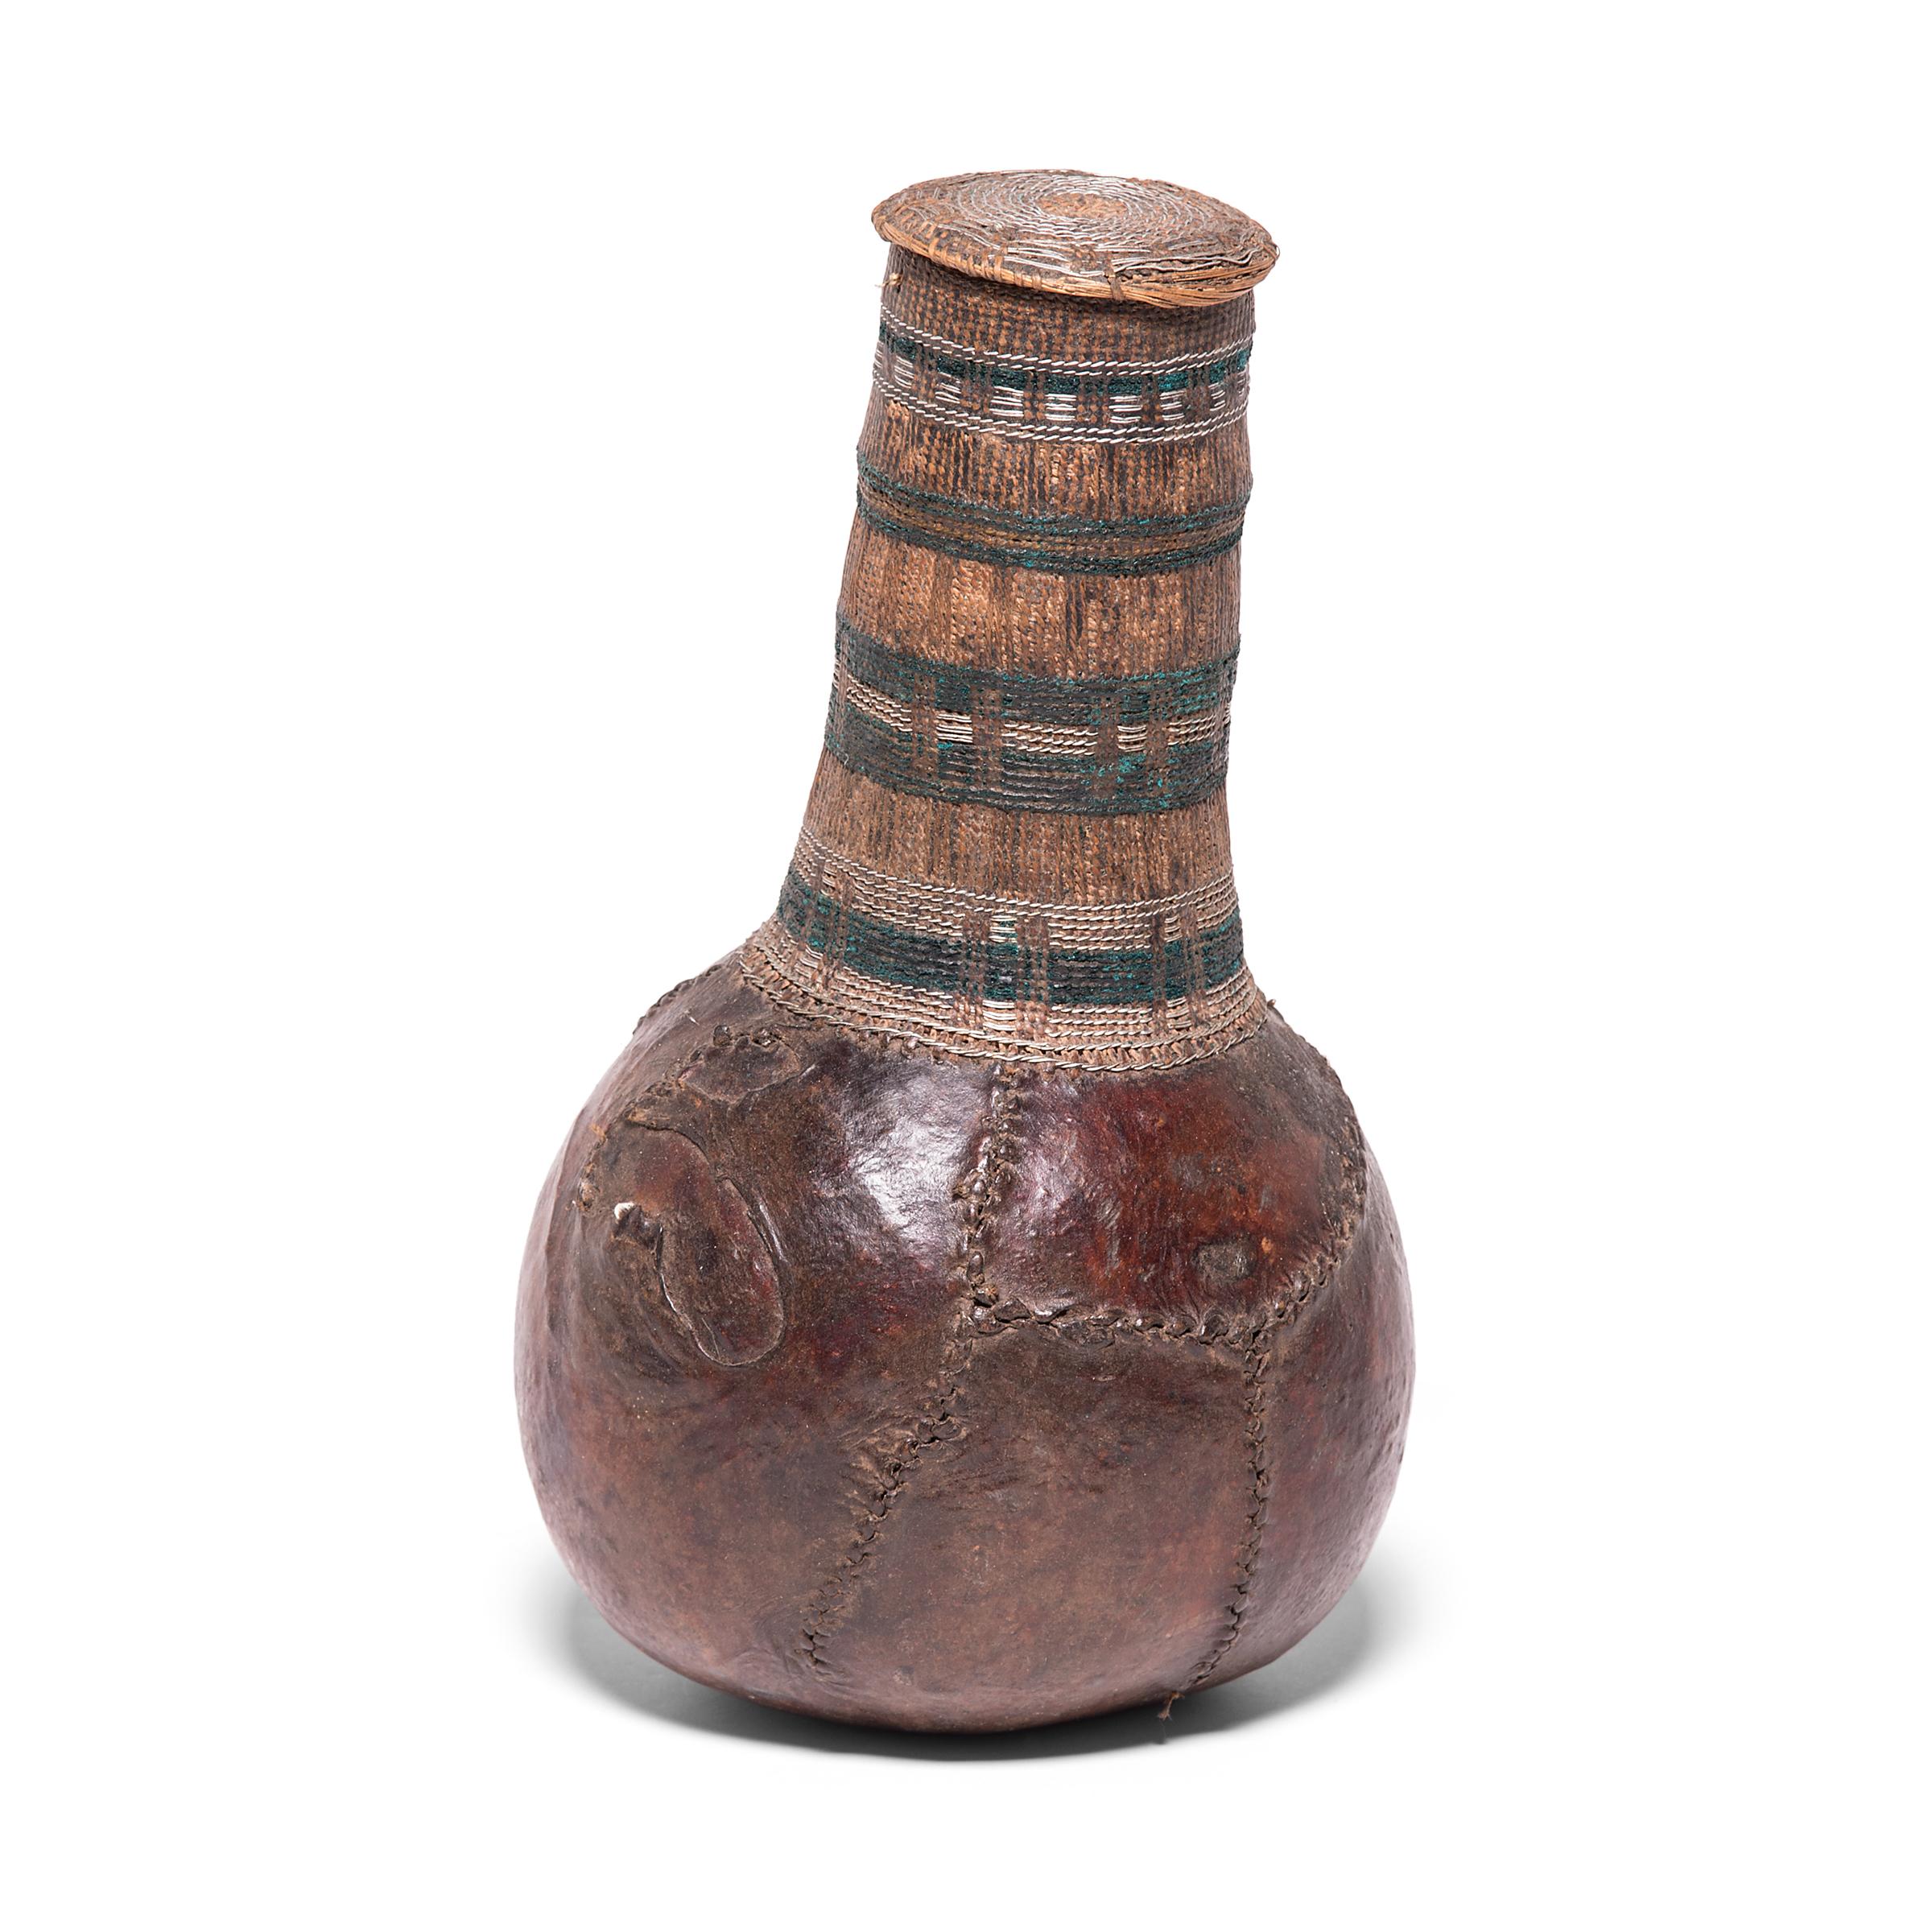 The Borana Oromo people of southern Ethiopia and northern Kenya are historically a cattle-keeping culture, and each household keeps a number of traditional vessels for storing and churning cow's milk. This bottle-form vessel would have been used